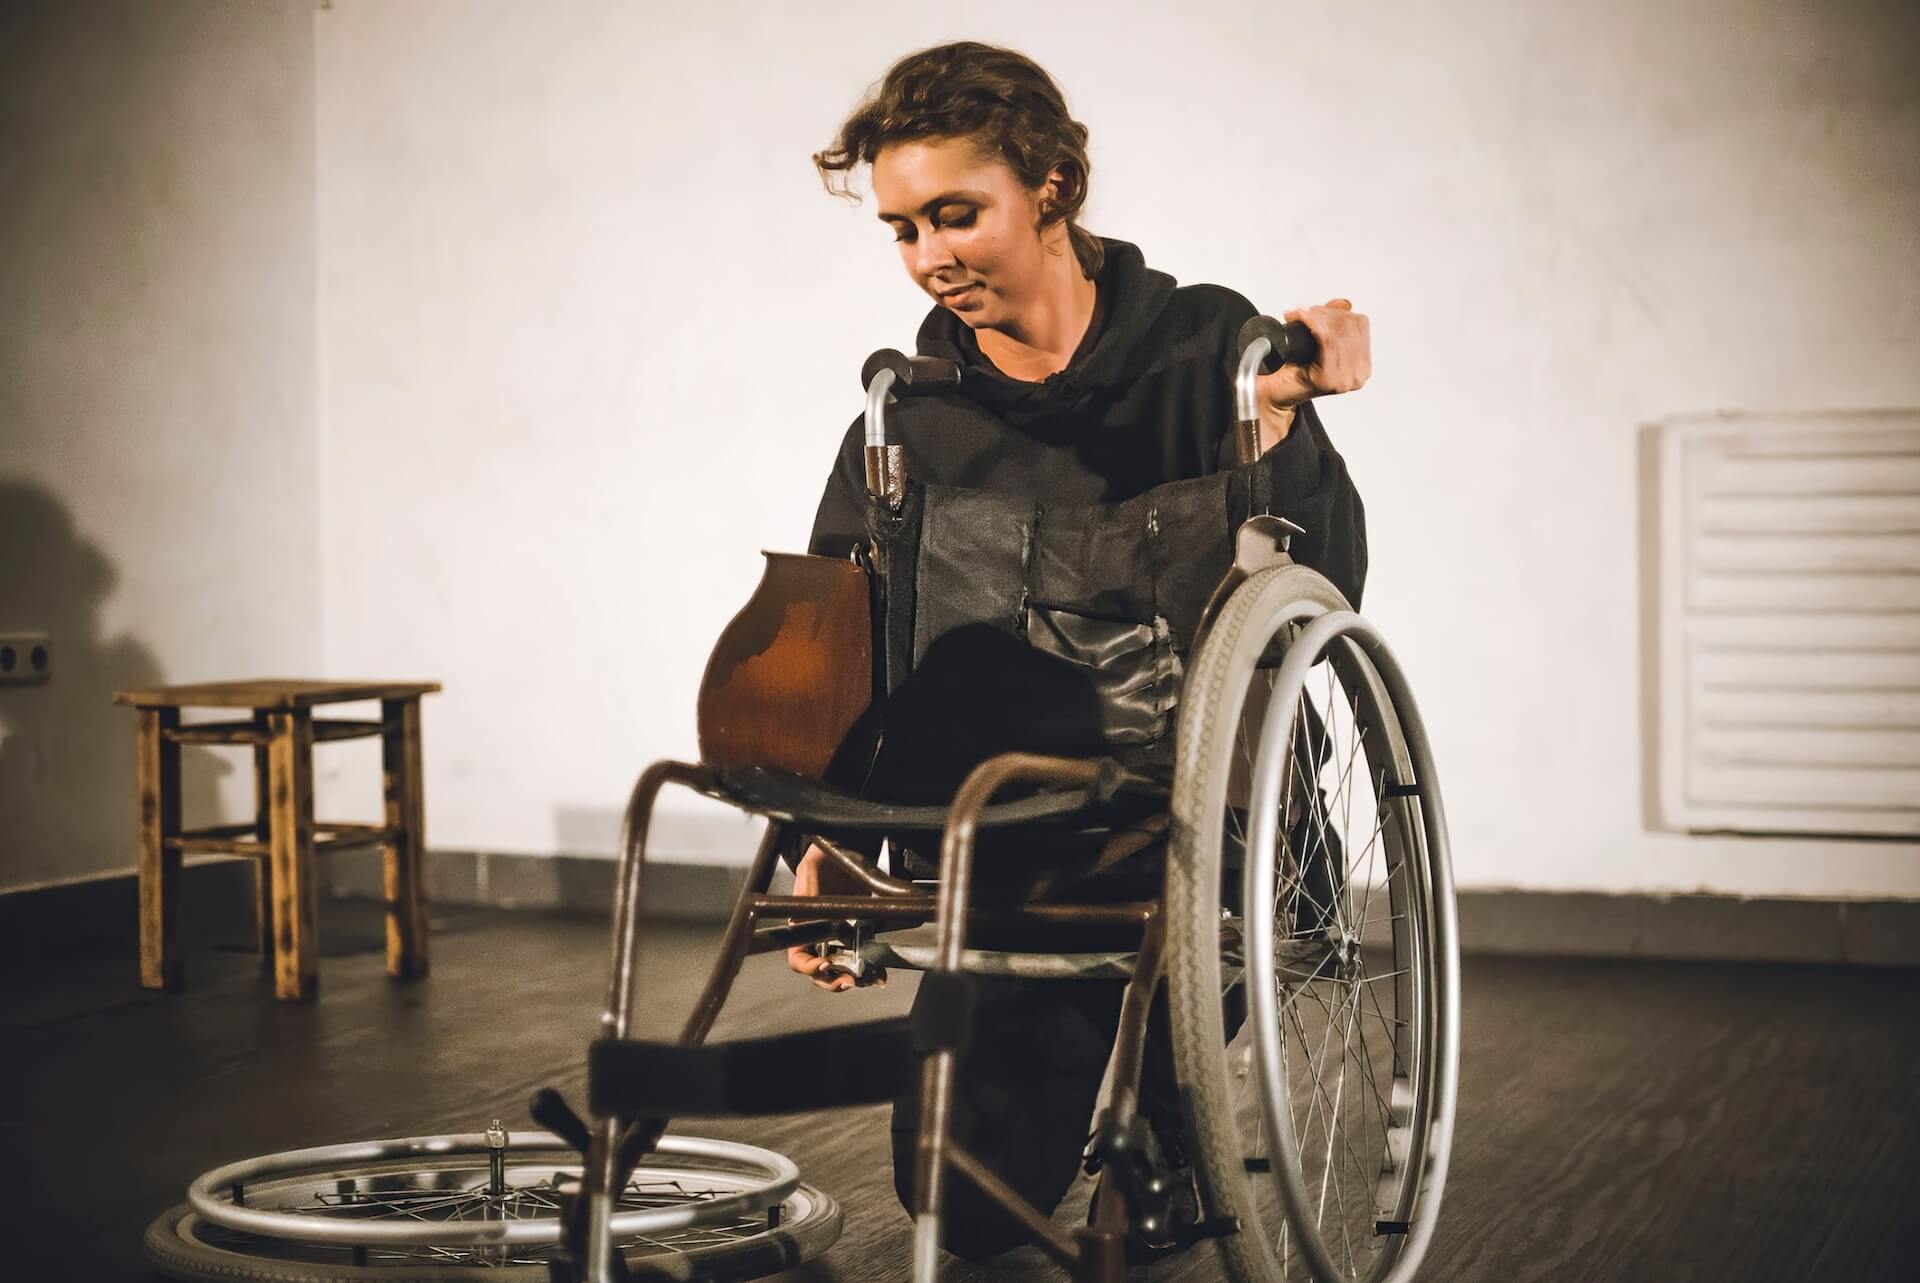 A performer is fixing a wheelchair.